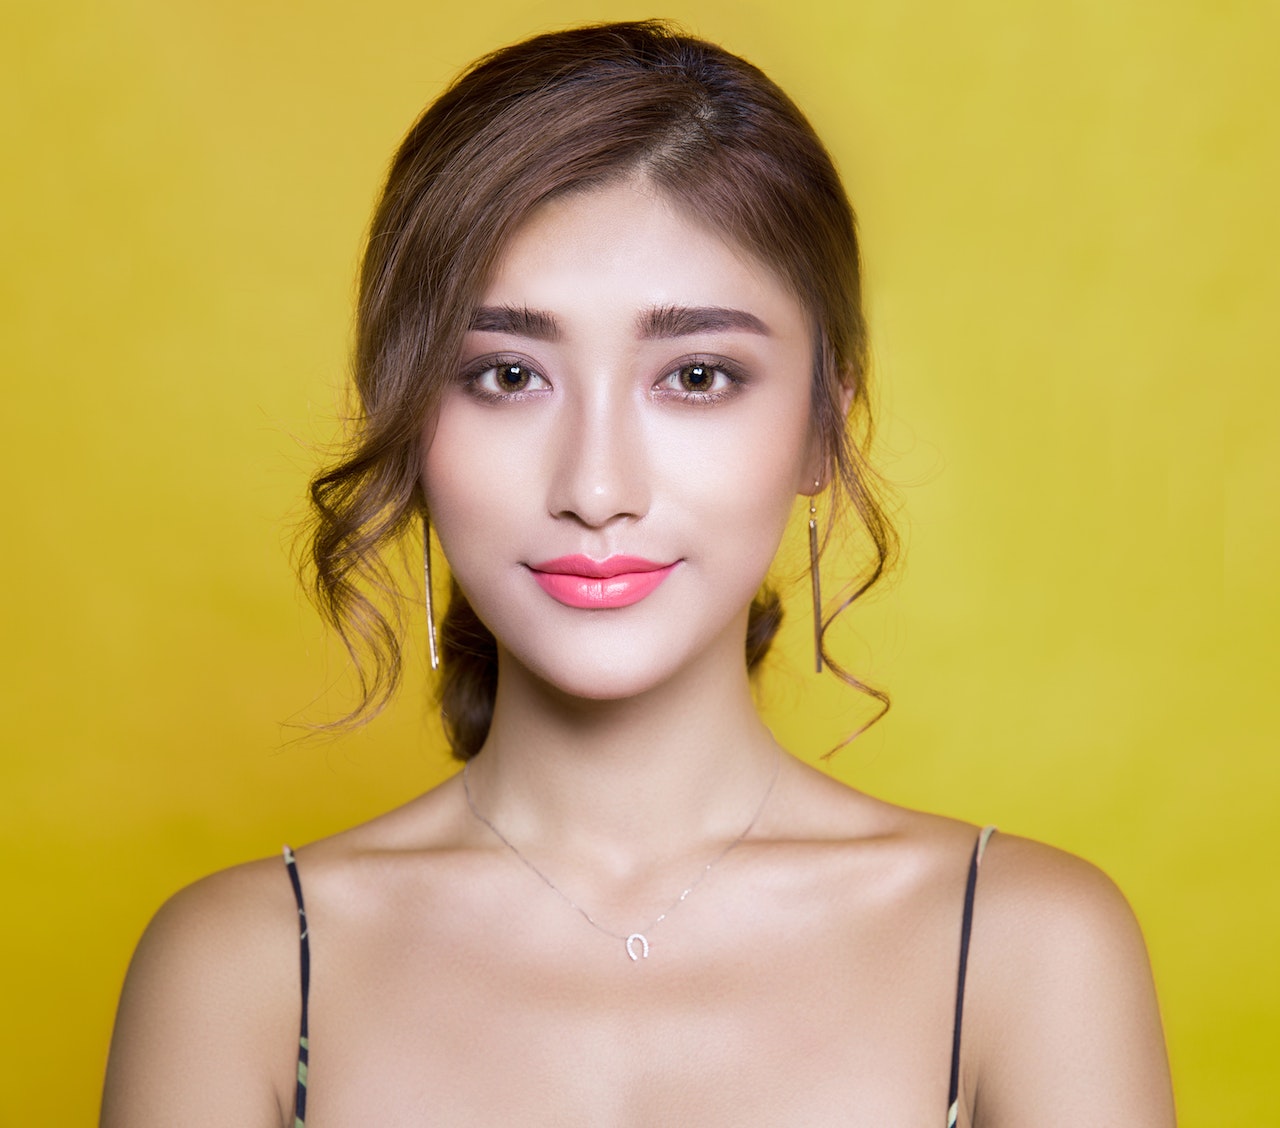 Asian woman posing for a photo on a yellow background.